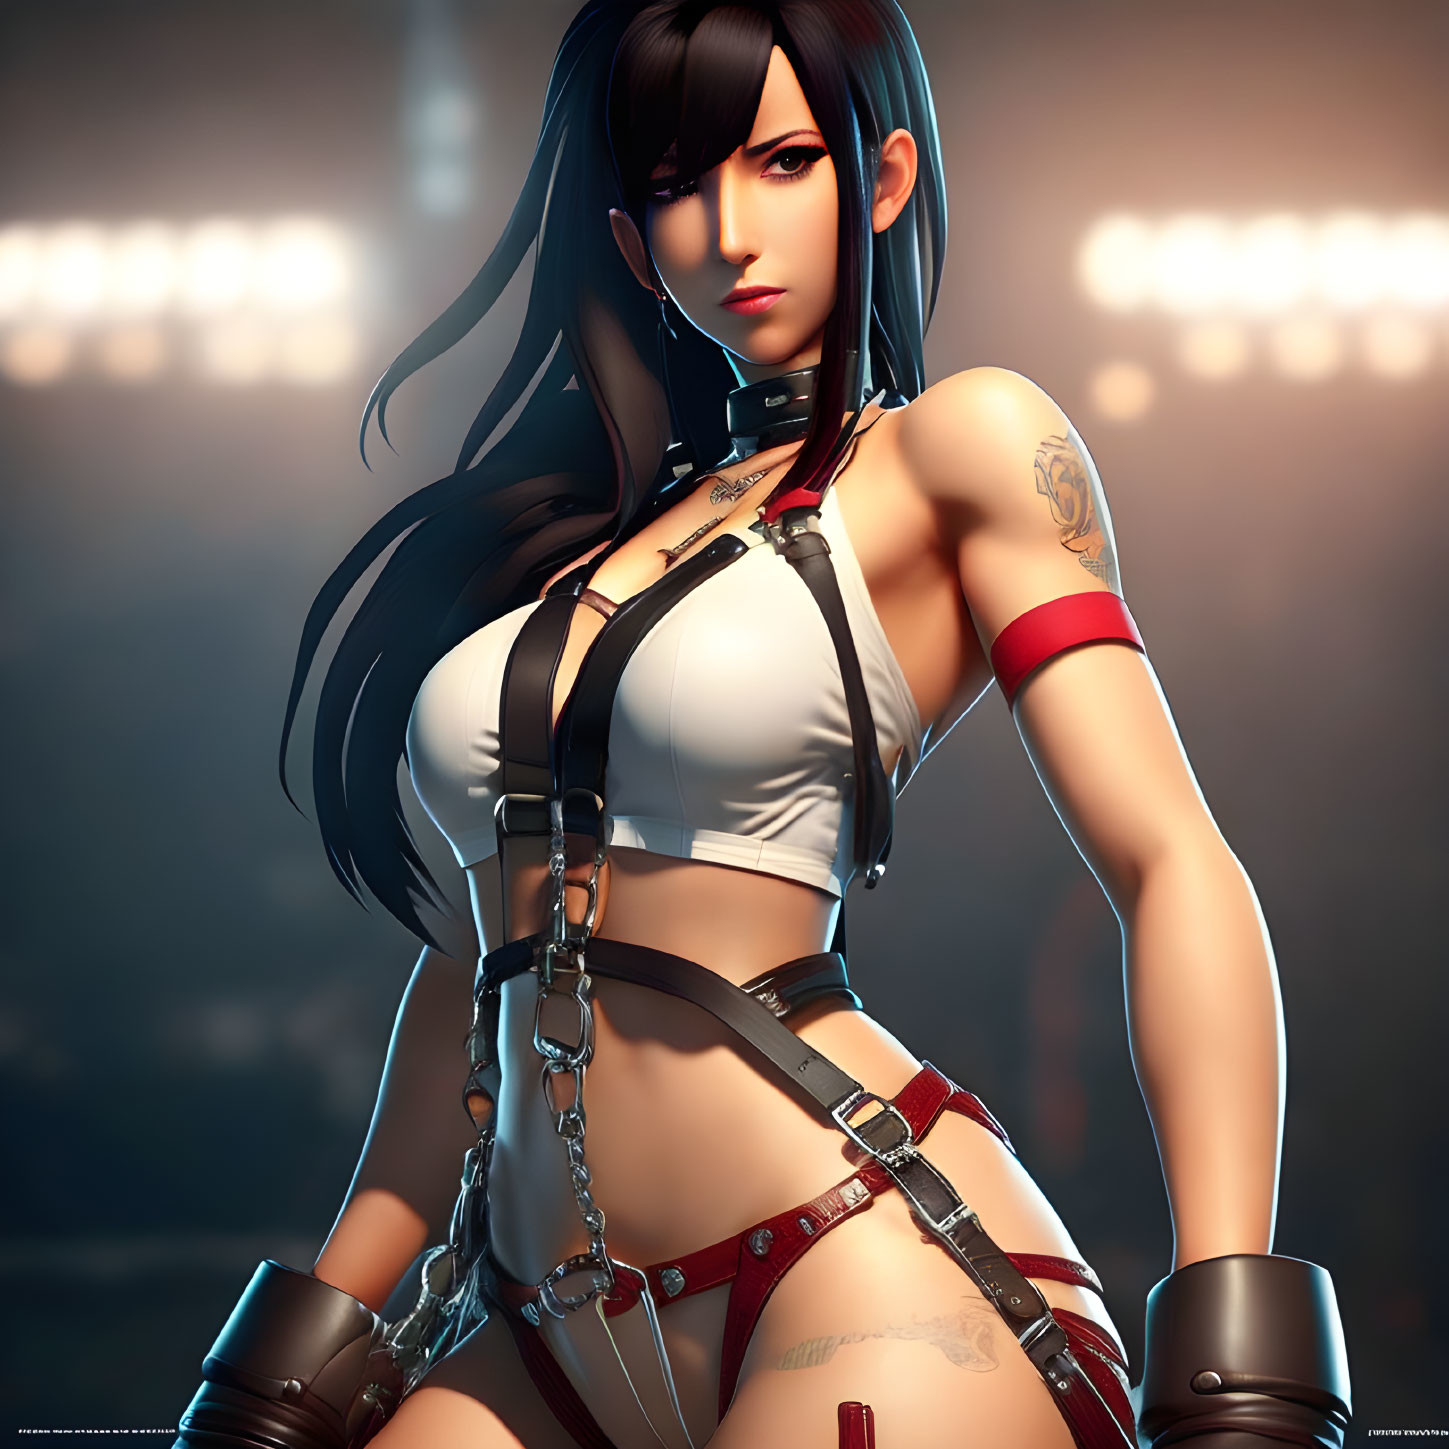 Digital artwork: Dark-haired female in white top with red harnesses, choker, and left arm